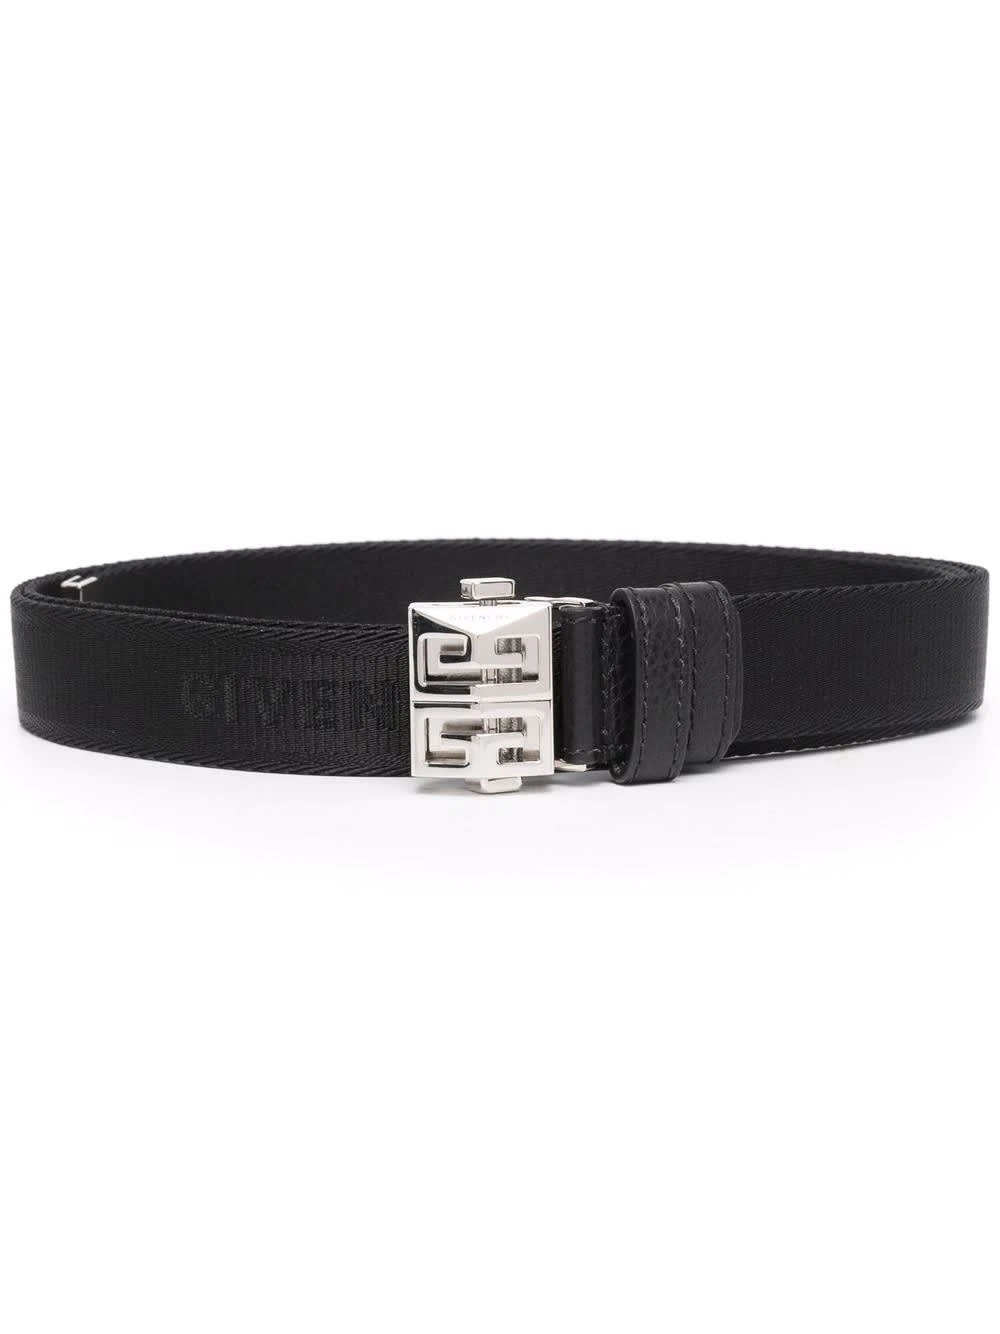 Man Black Givenchy Canvas Belt With Silver 4g Buckle